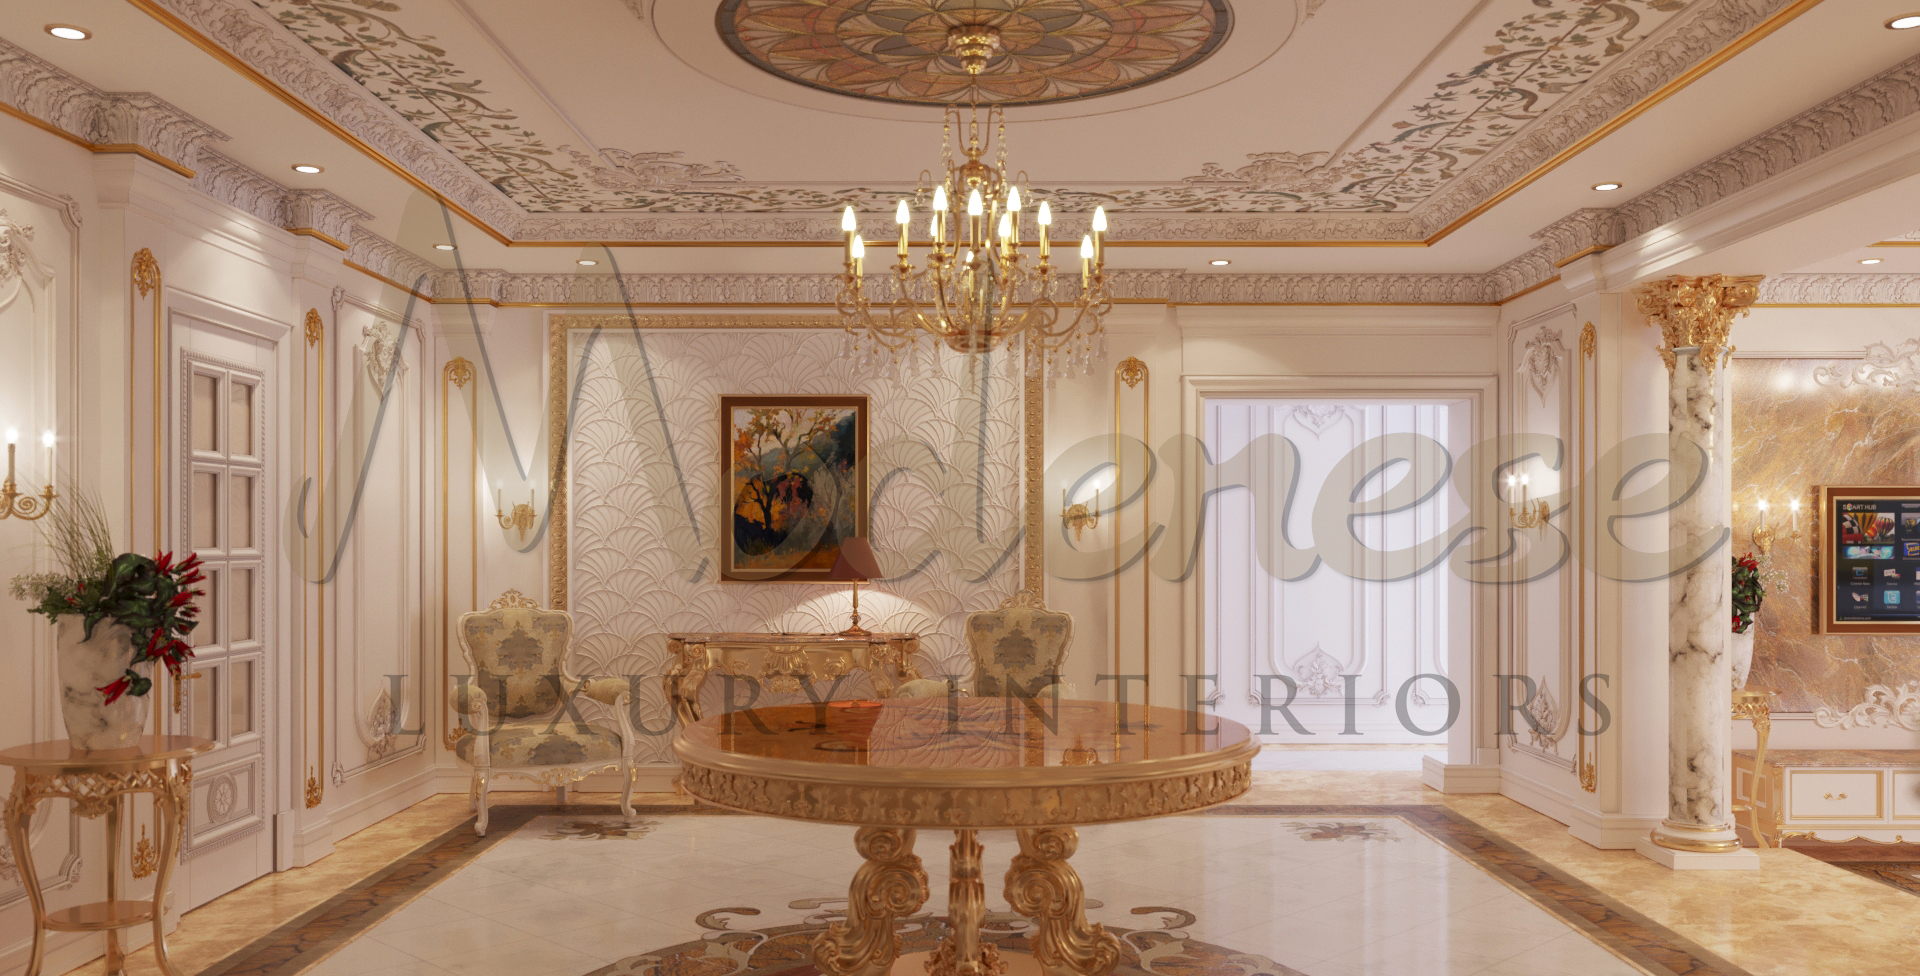 Sophisticated Italian design for luxurious hall. High-end quality, bespoke interiors. Italian handmade interiors. Bespoke interior design project from Modenese Luxury Interiors.